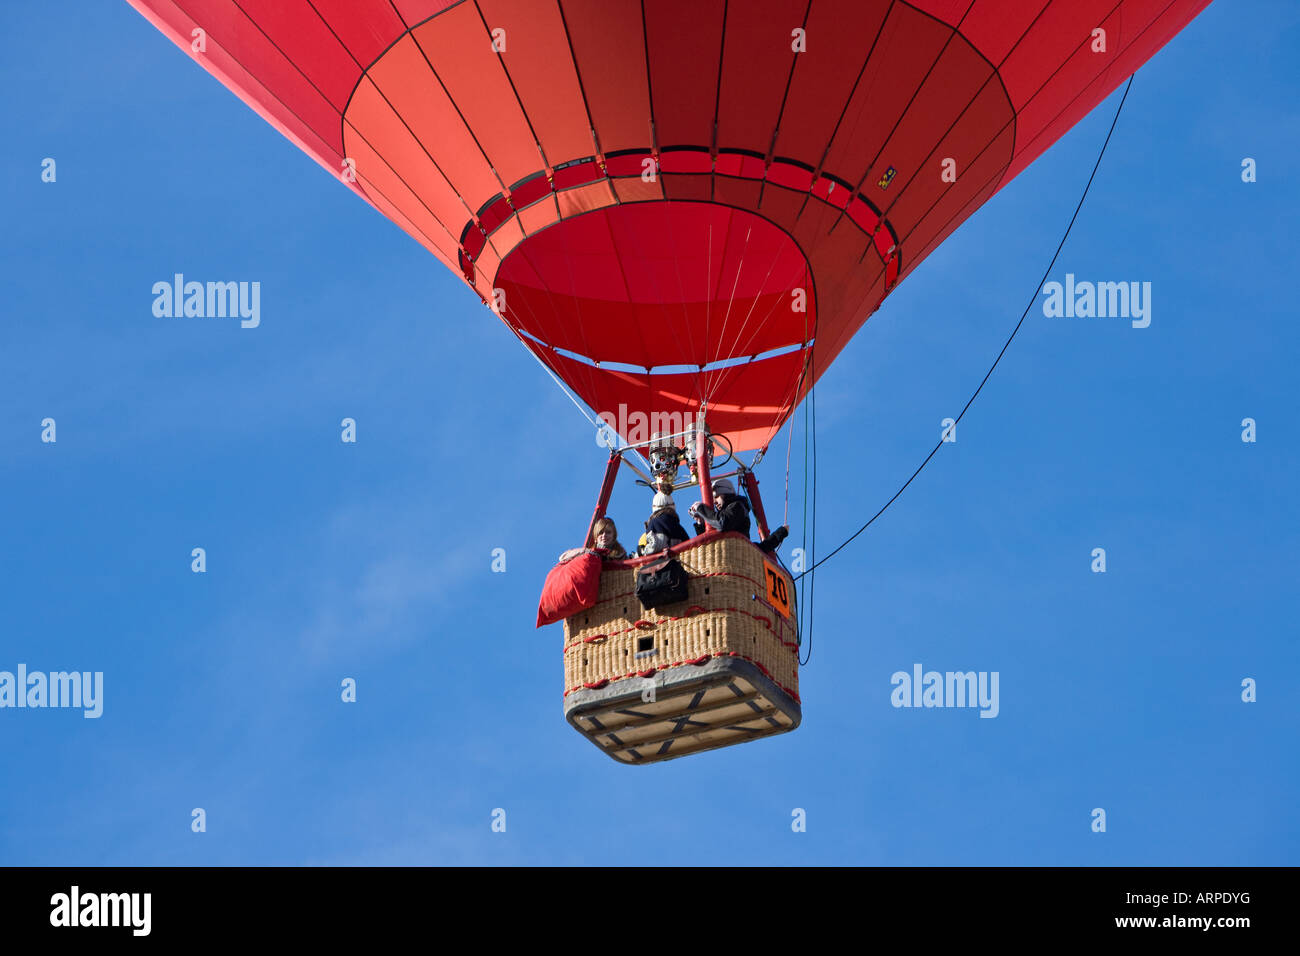 Hot Air Balloons Festival at Chateau d Oex Stock Photo